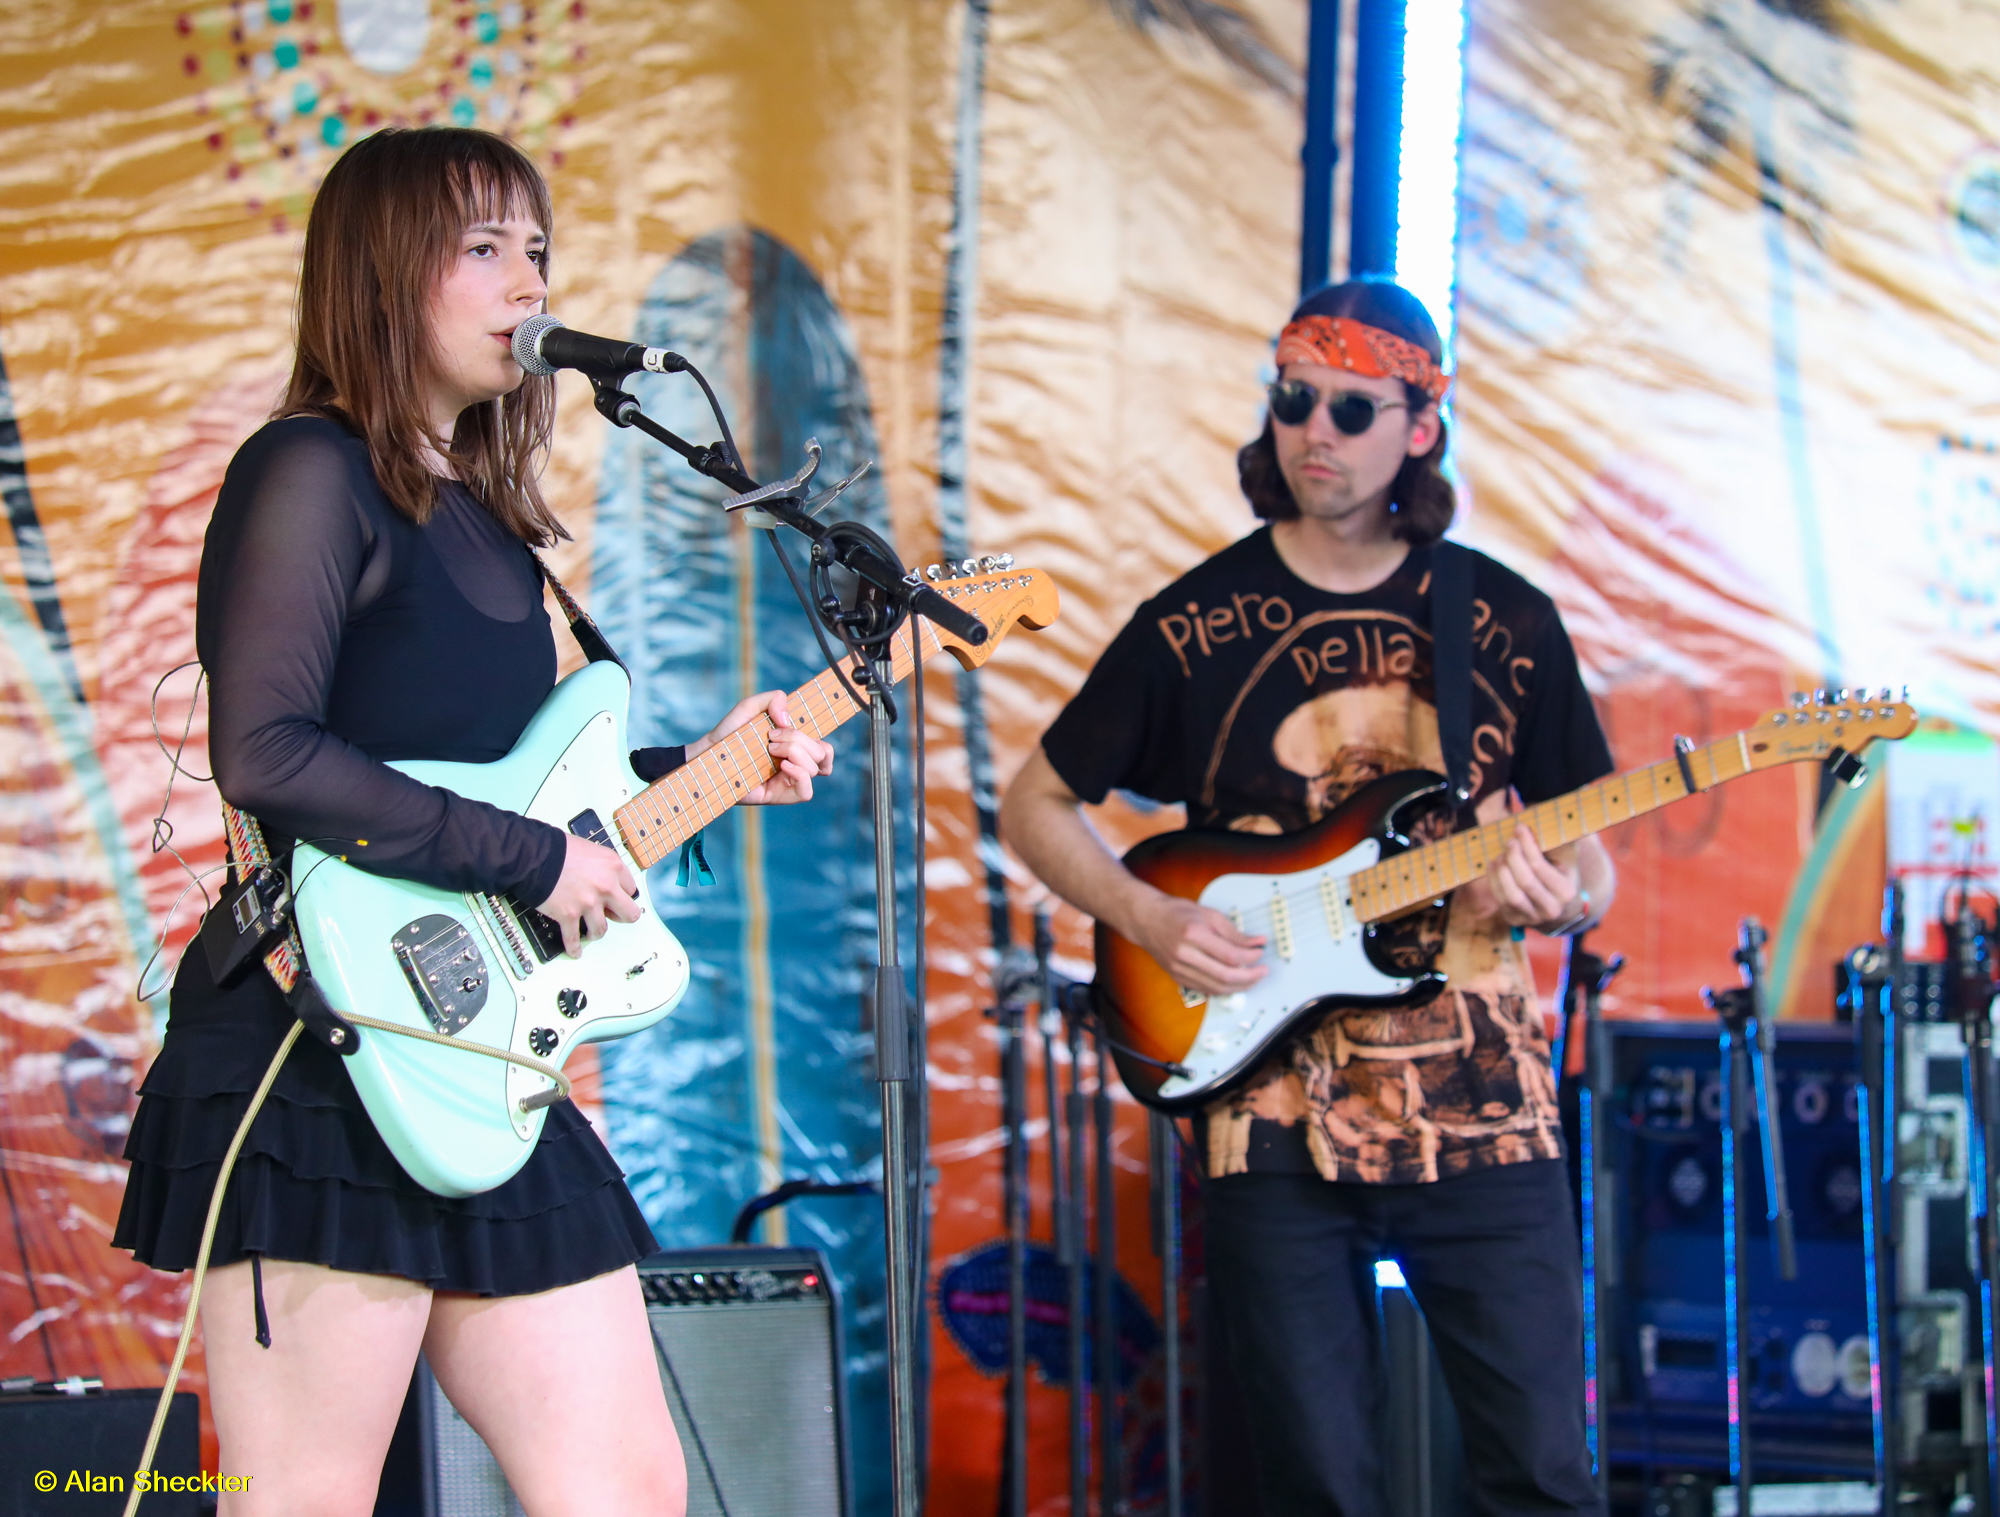 Jordana (left) performing with her band on Friday at the Riptide stage